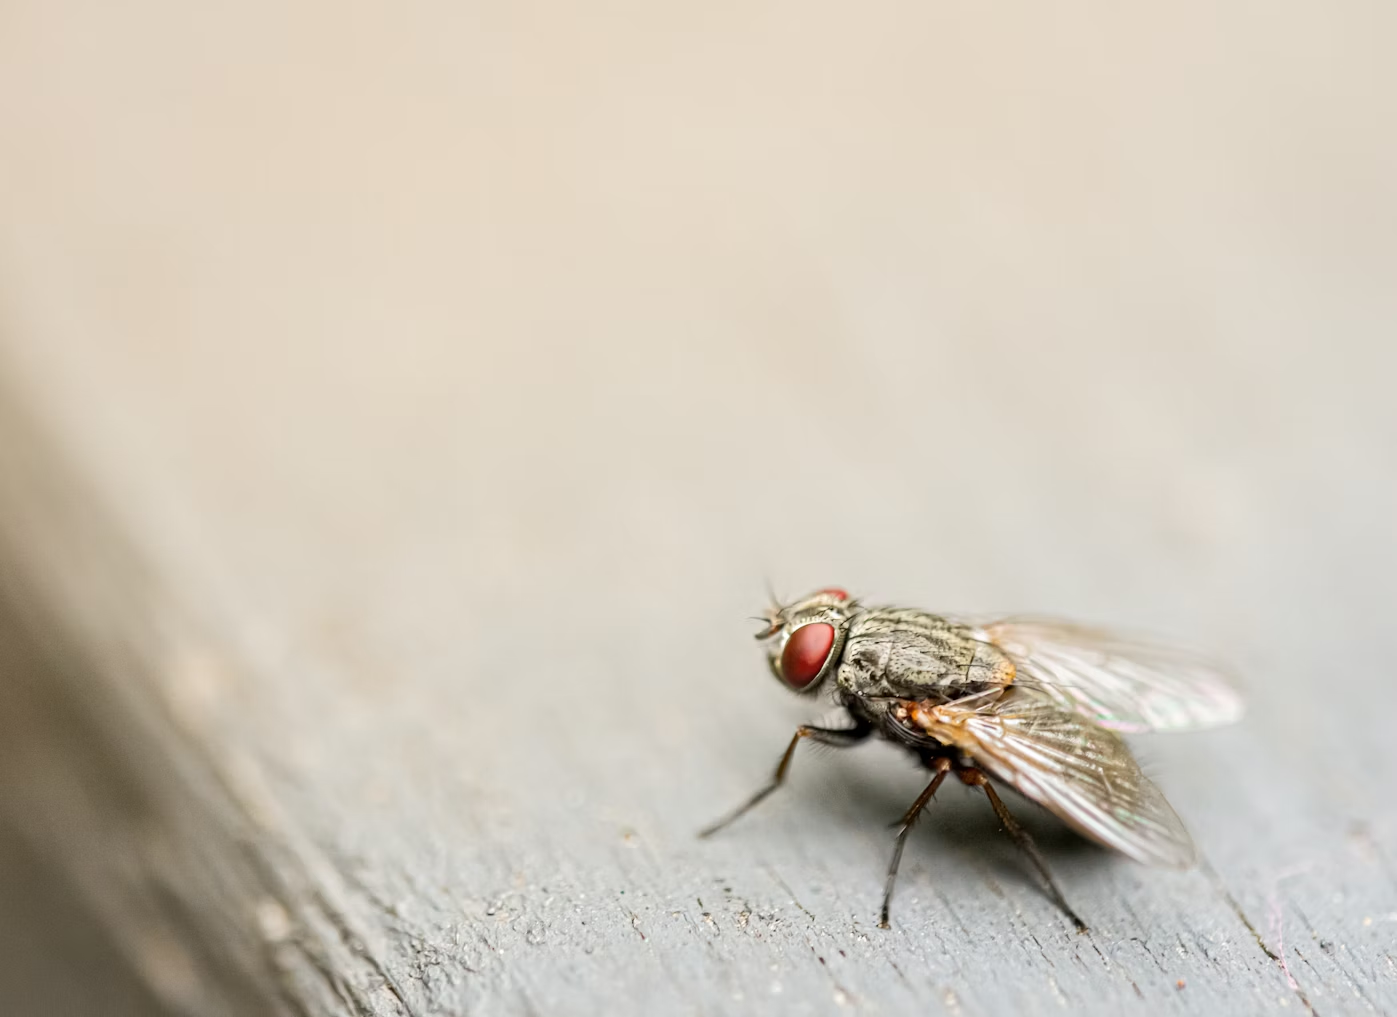 Flies in Your Face? Don’t Be a Fly Magnet: Effective Strategies for Keeping Them Out